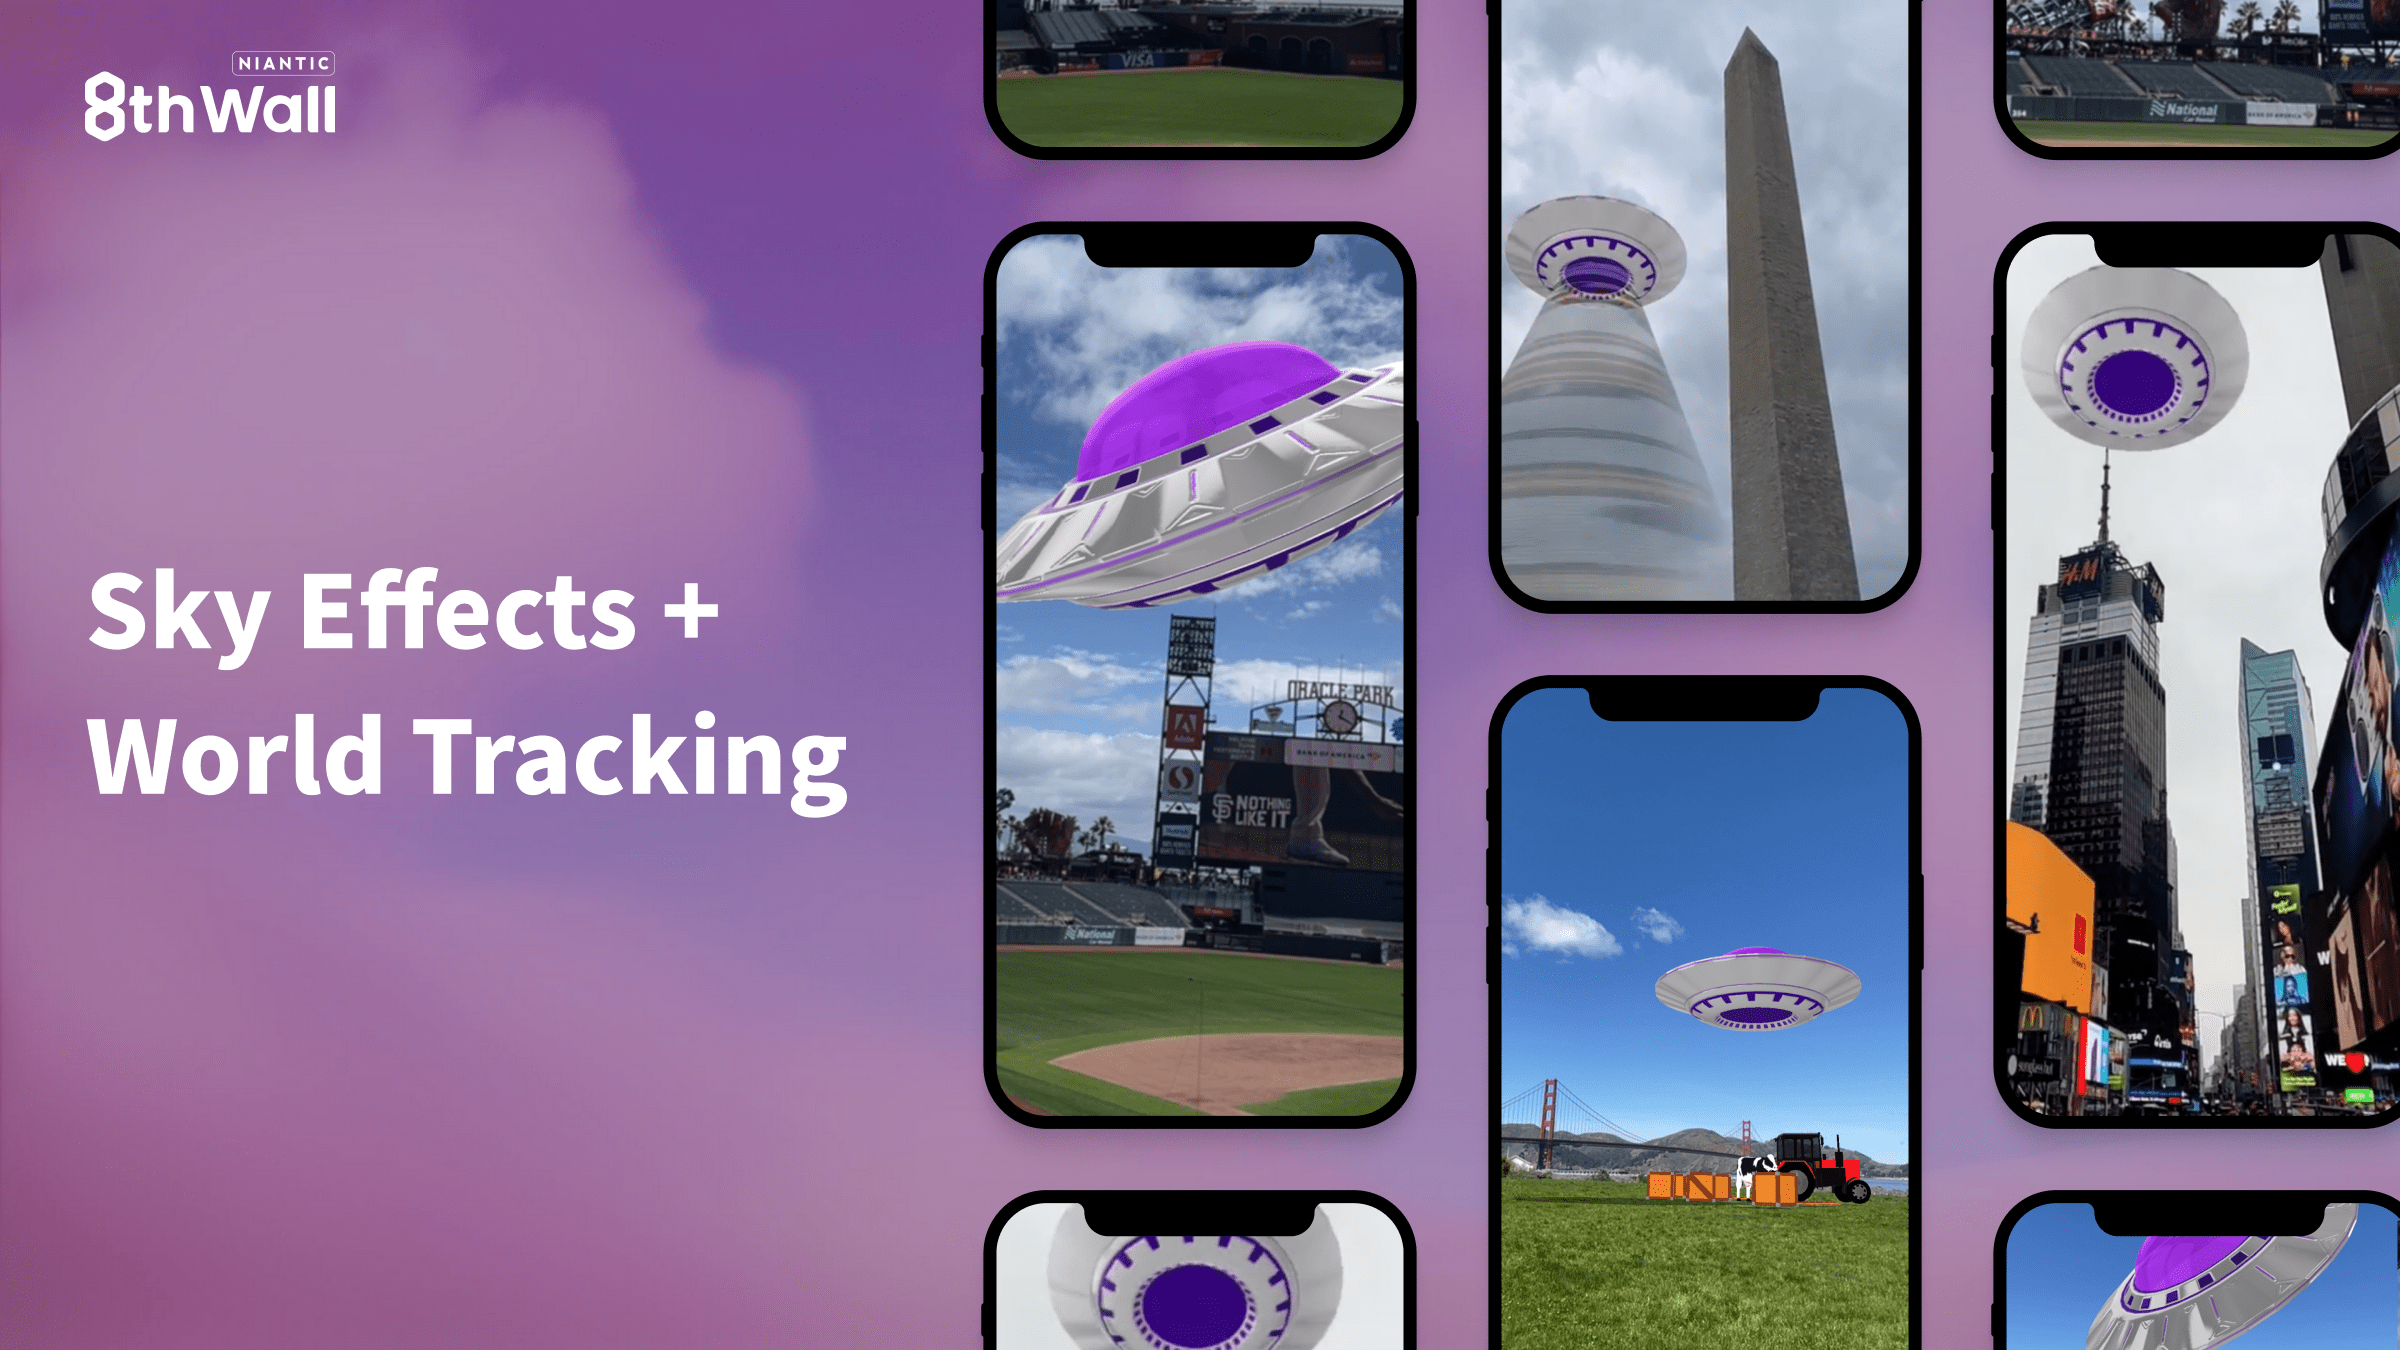 Sky Effects + World Tracking: Everything is now a canvas for AR